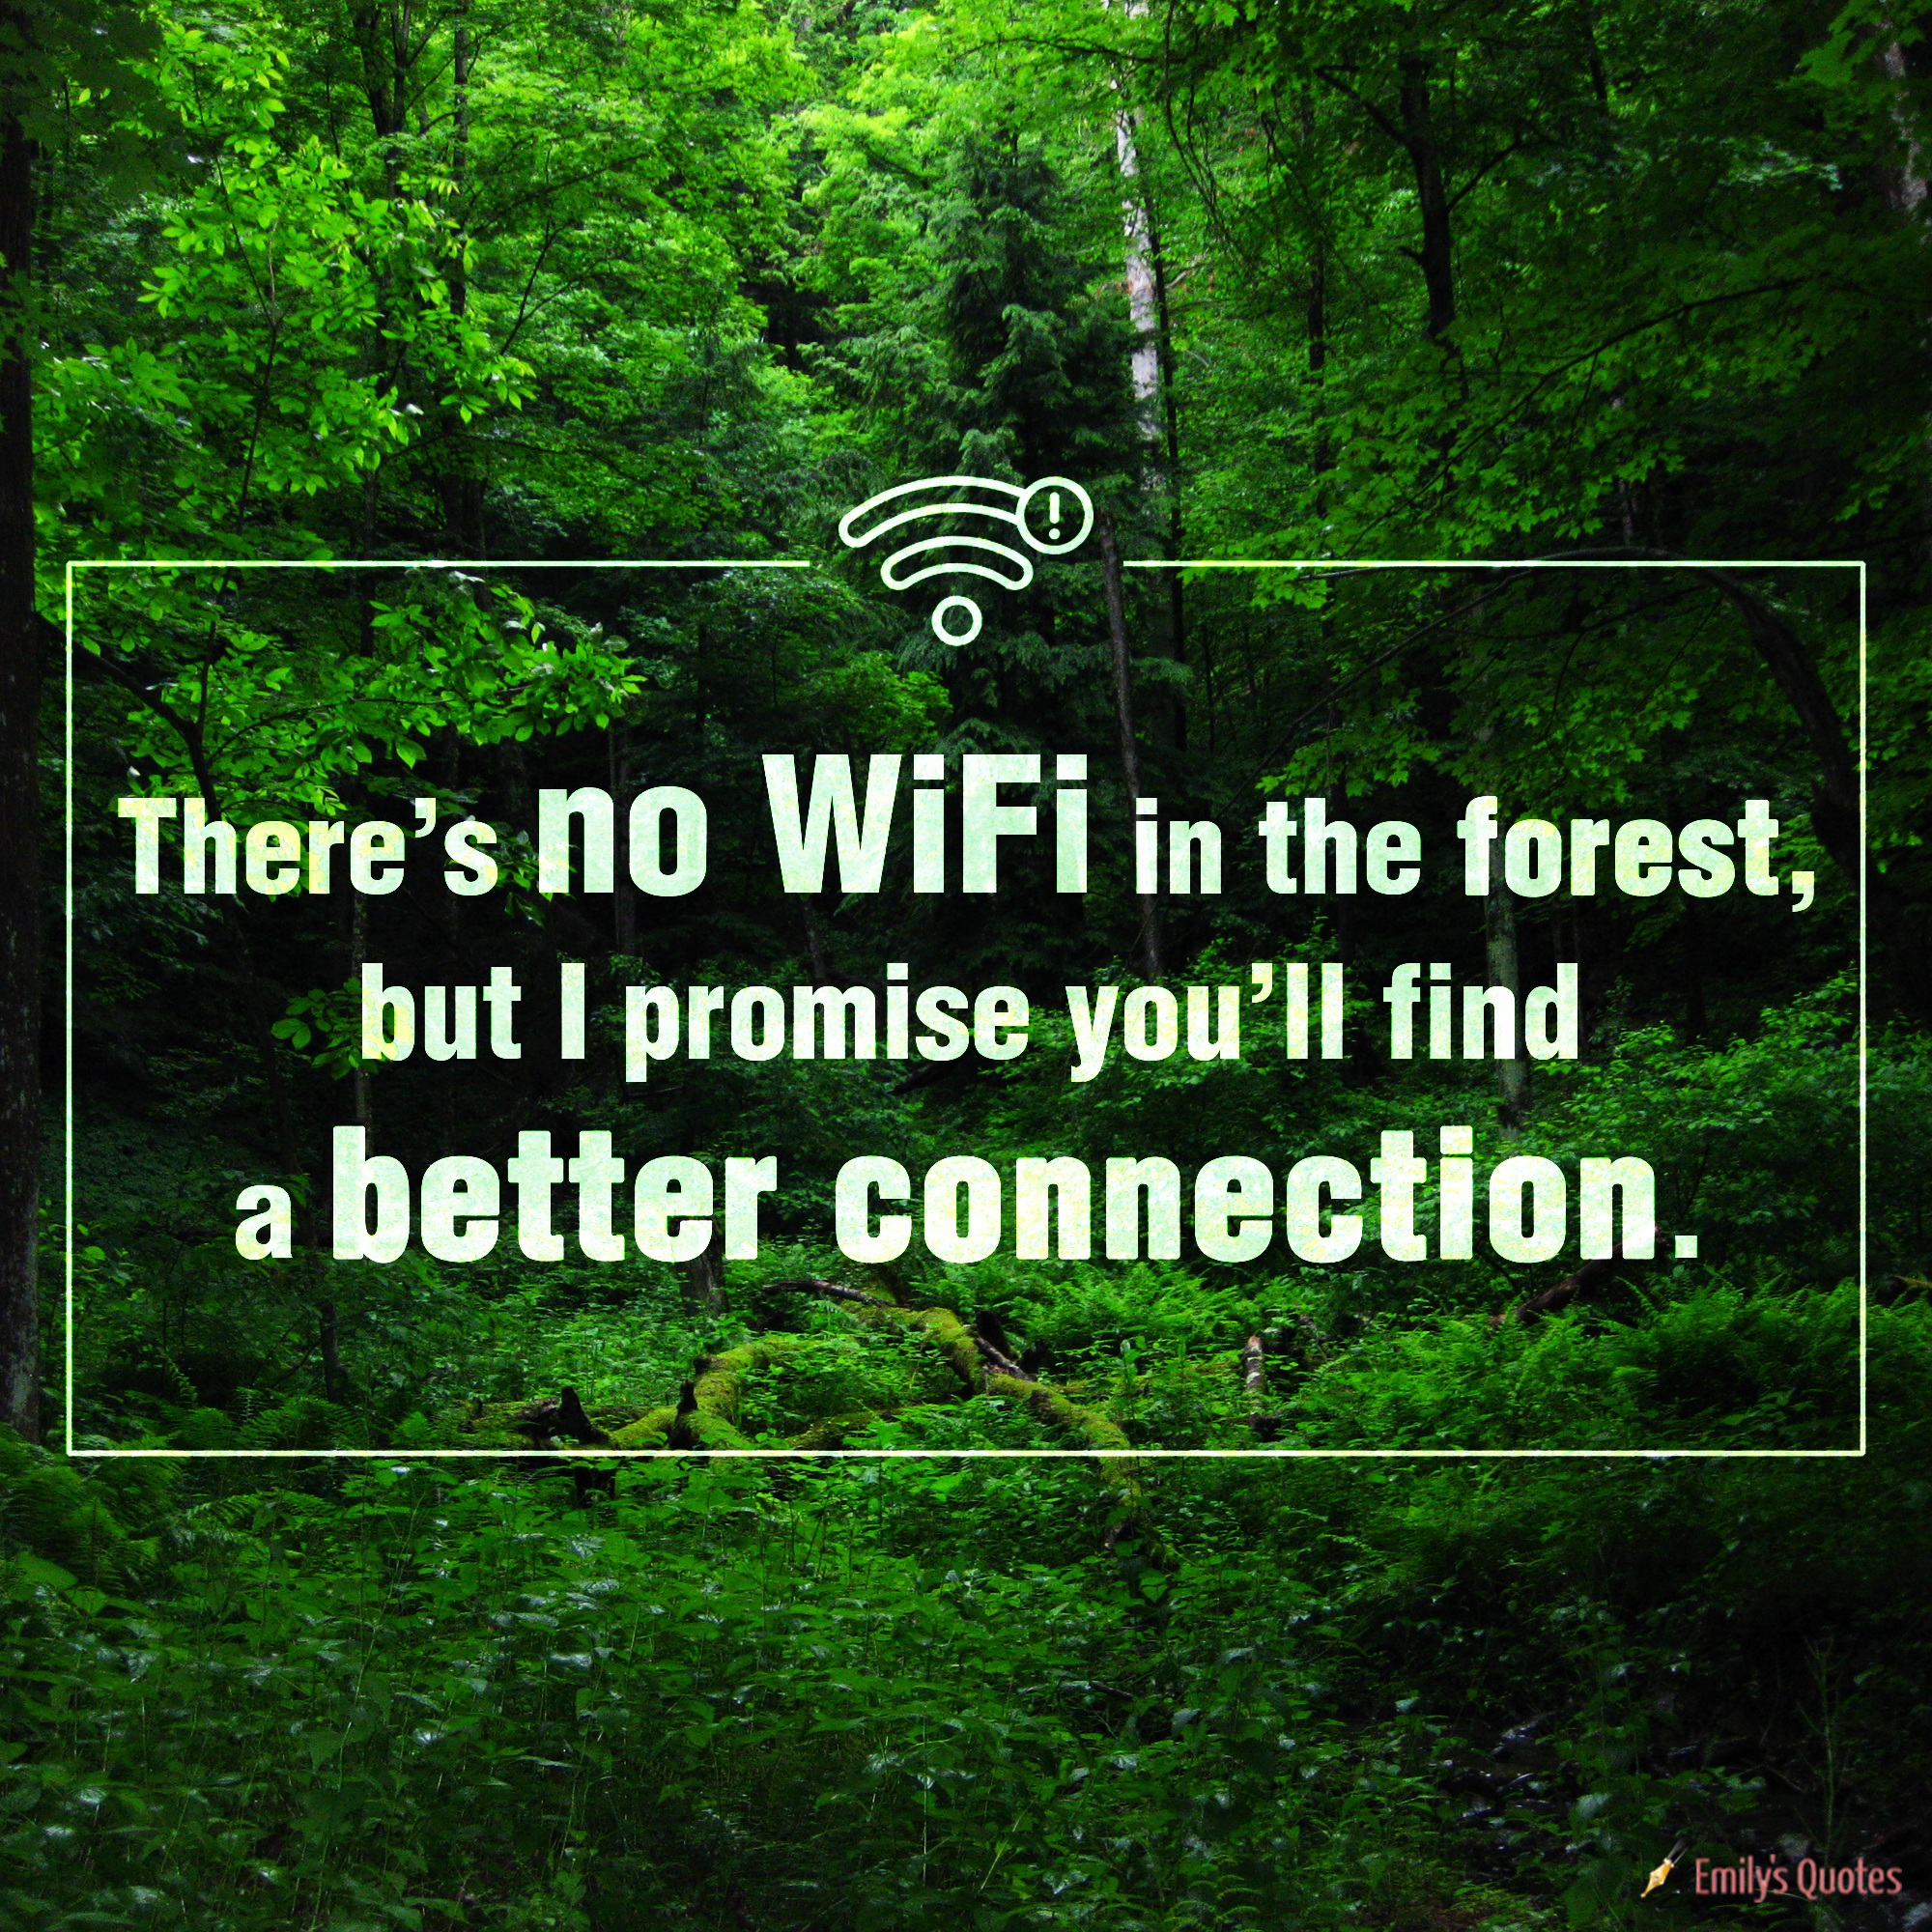 There’s no WiFi in the forest, but I promise you’ll find a better connection